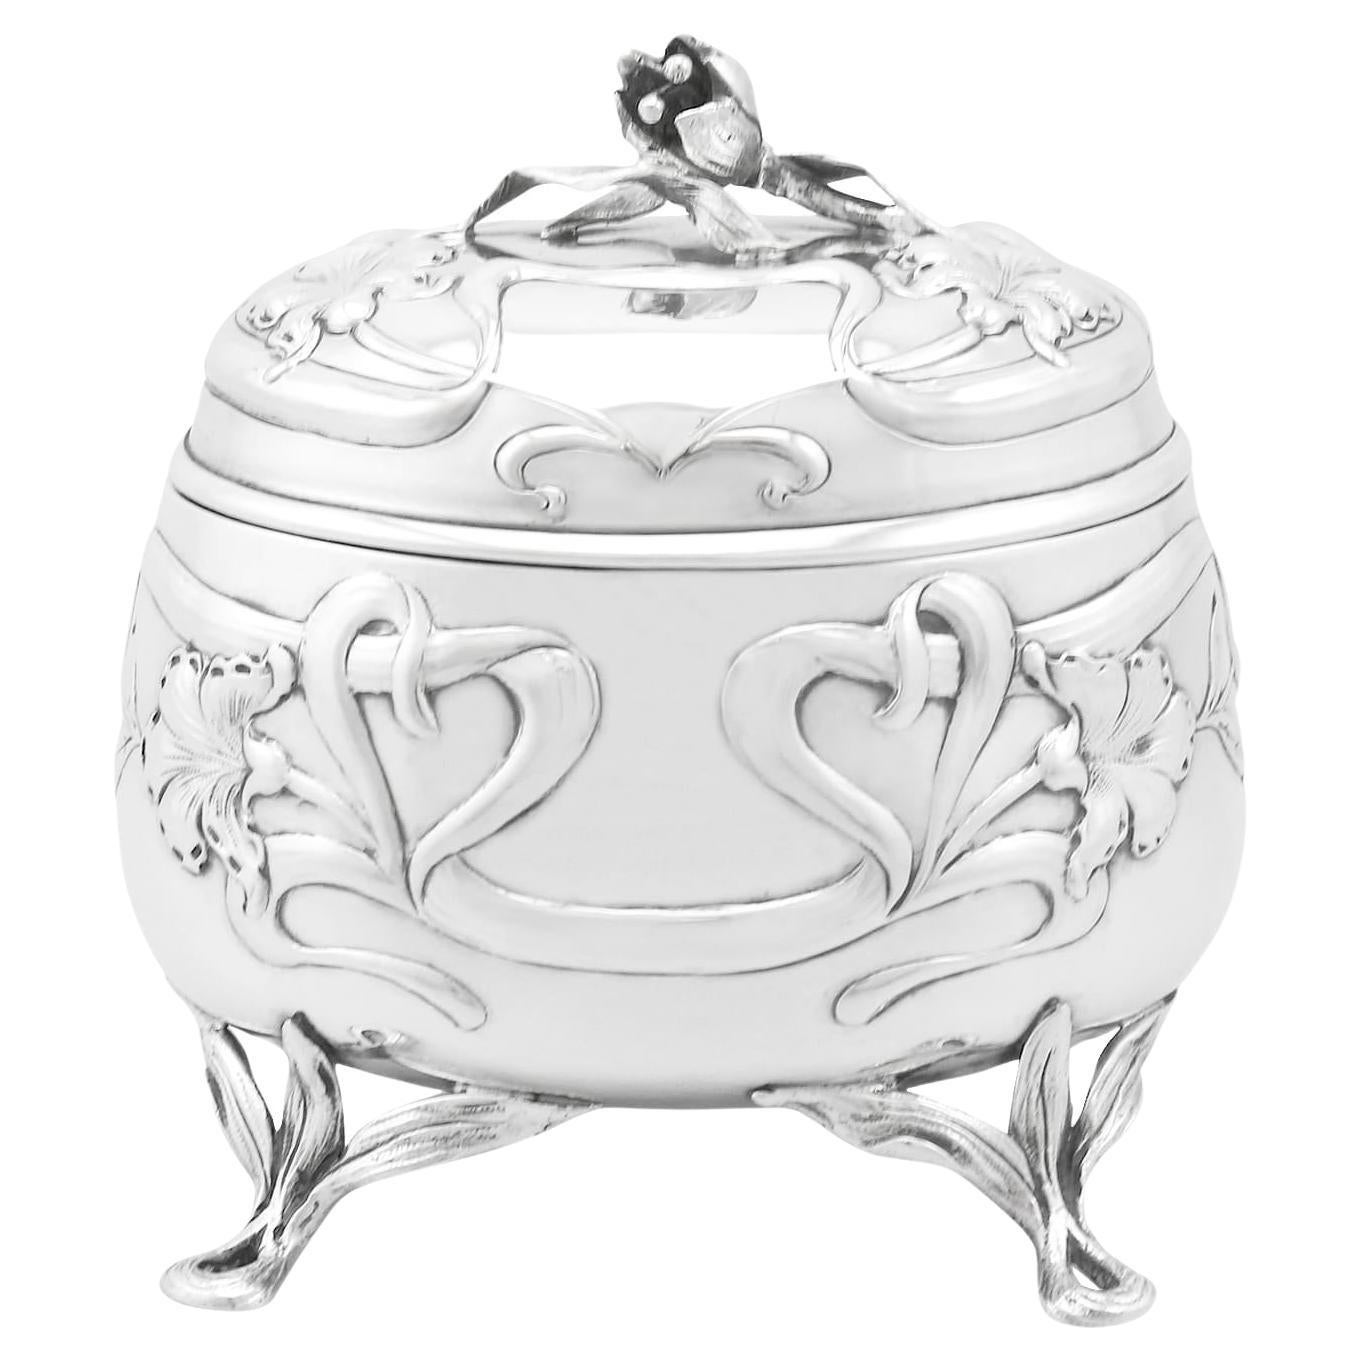 1910s Austro-Hungarian Silver Tea Caddy For Sale